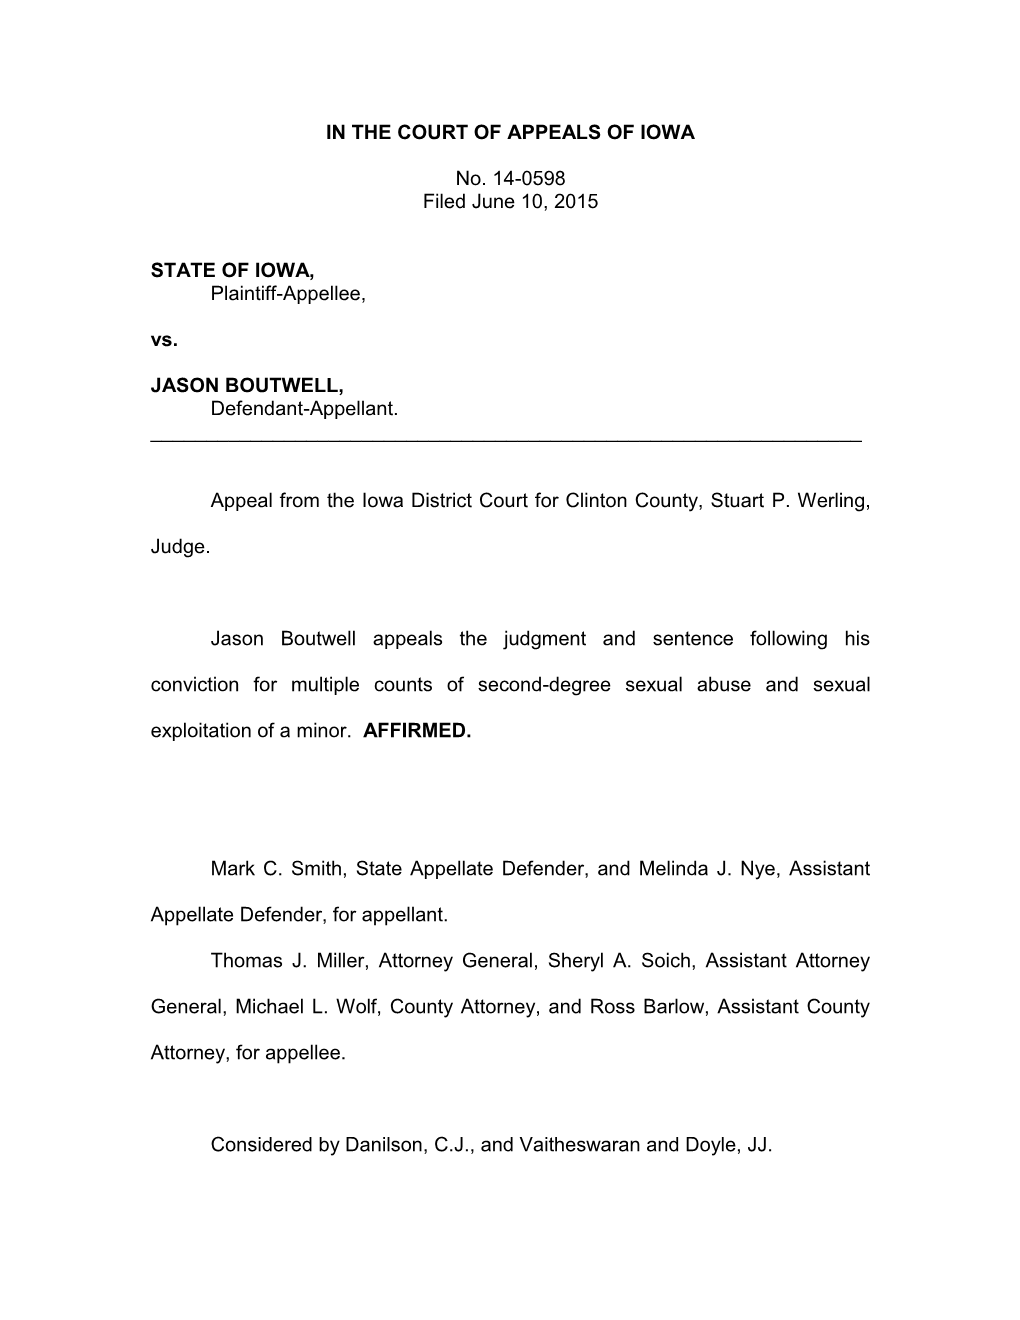 IN the COURT of APPEALS of IOWA No. 14-0598 Filed June 10